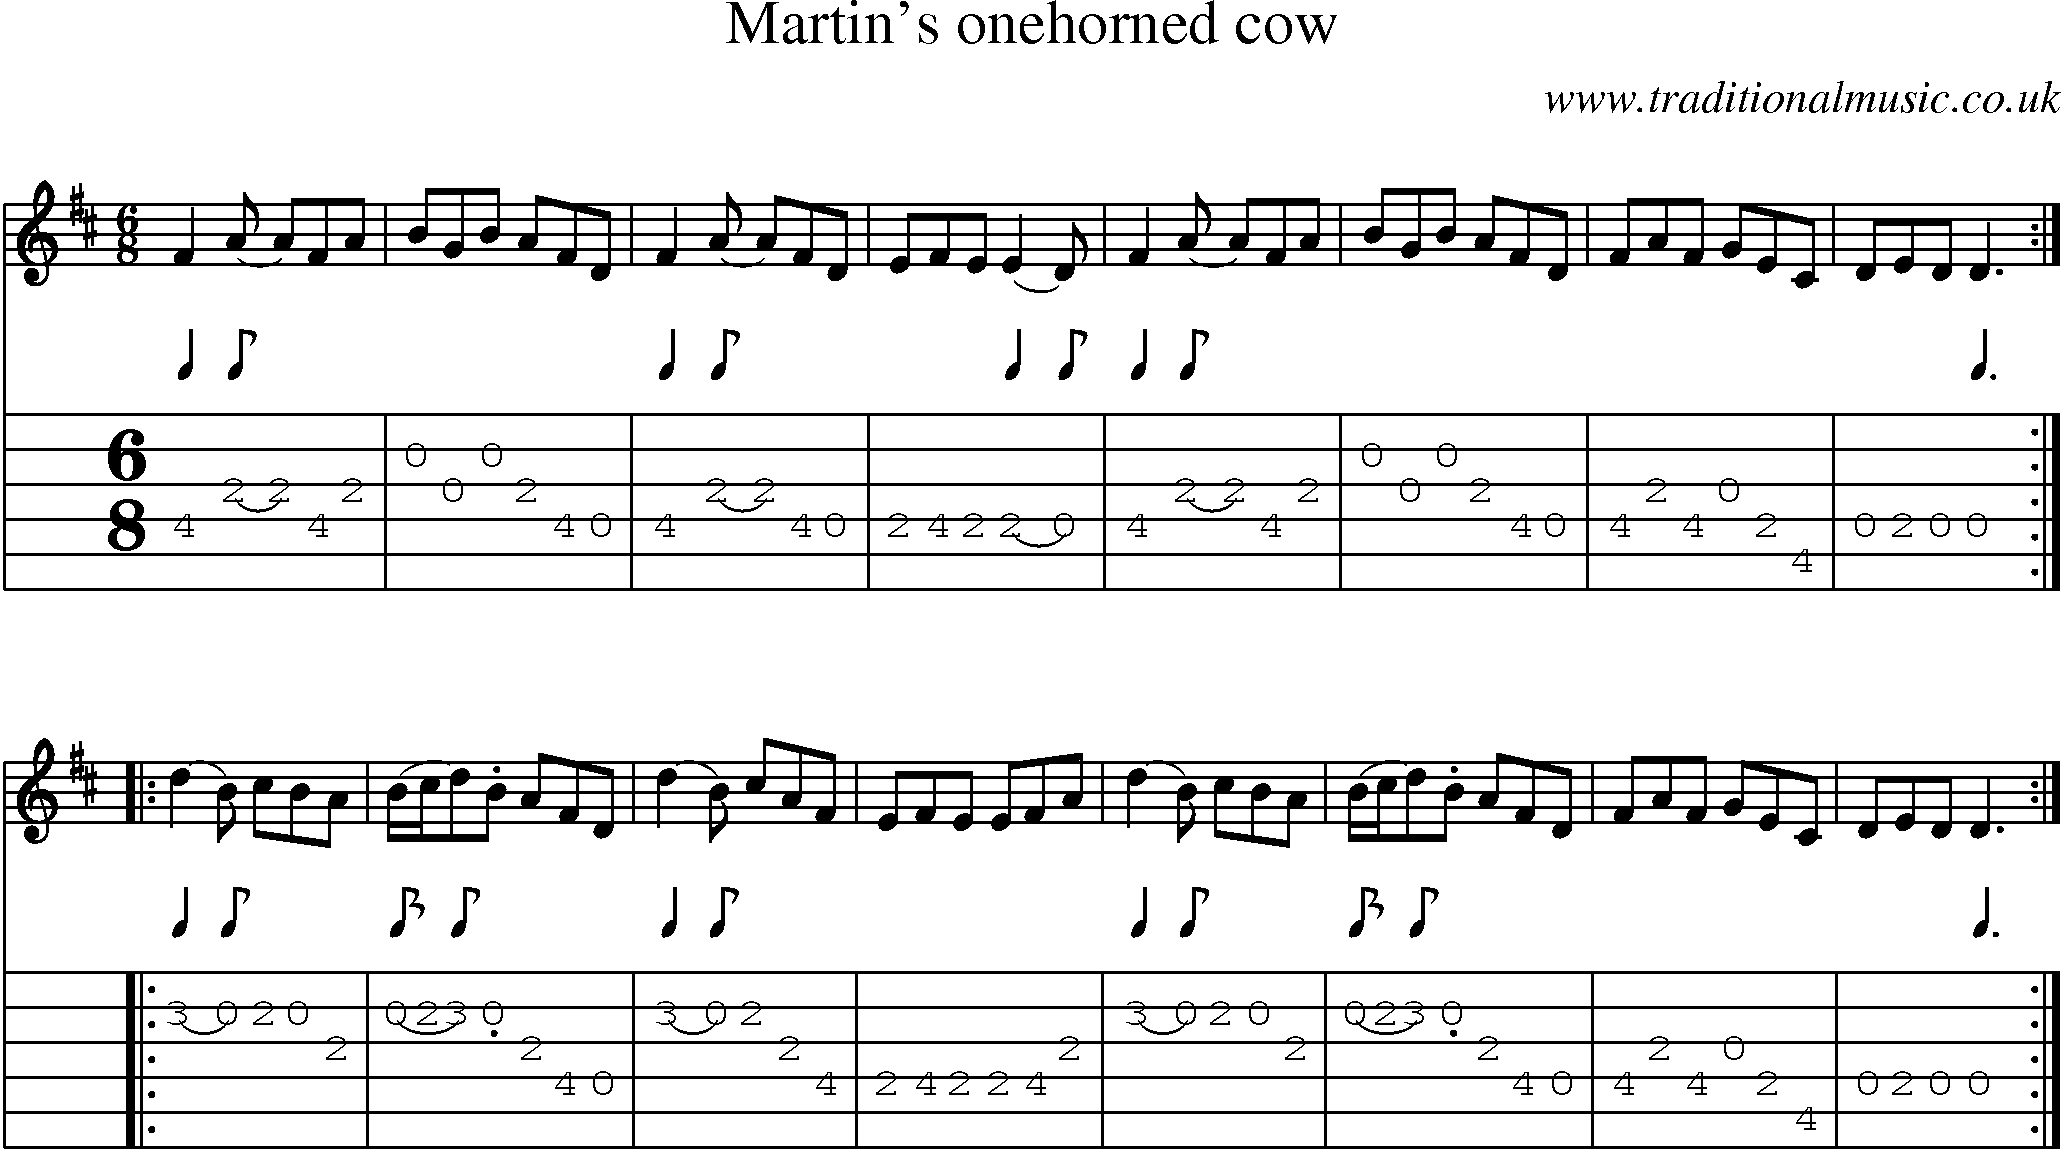 Music Score and Guitar Tabs for Martins Onehorned Cow